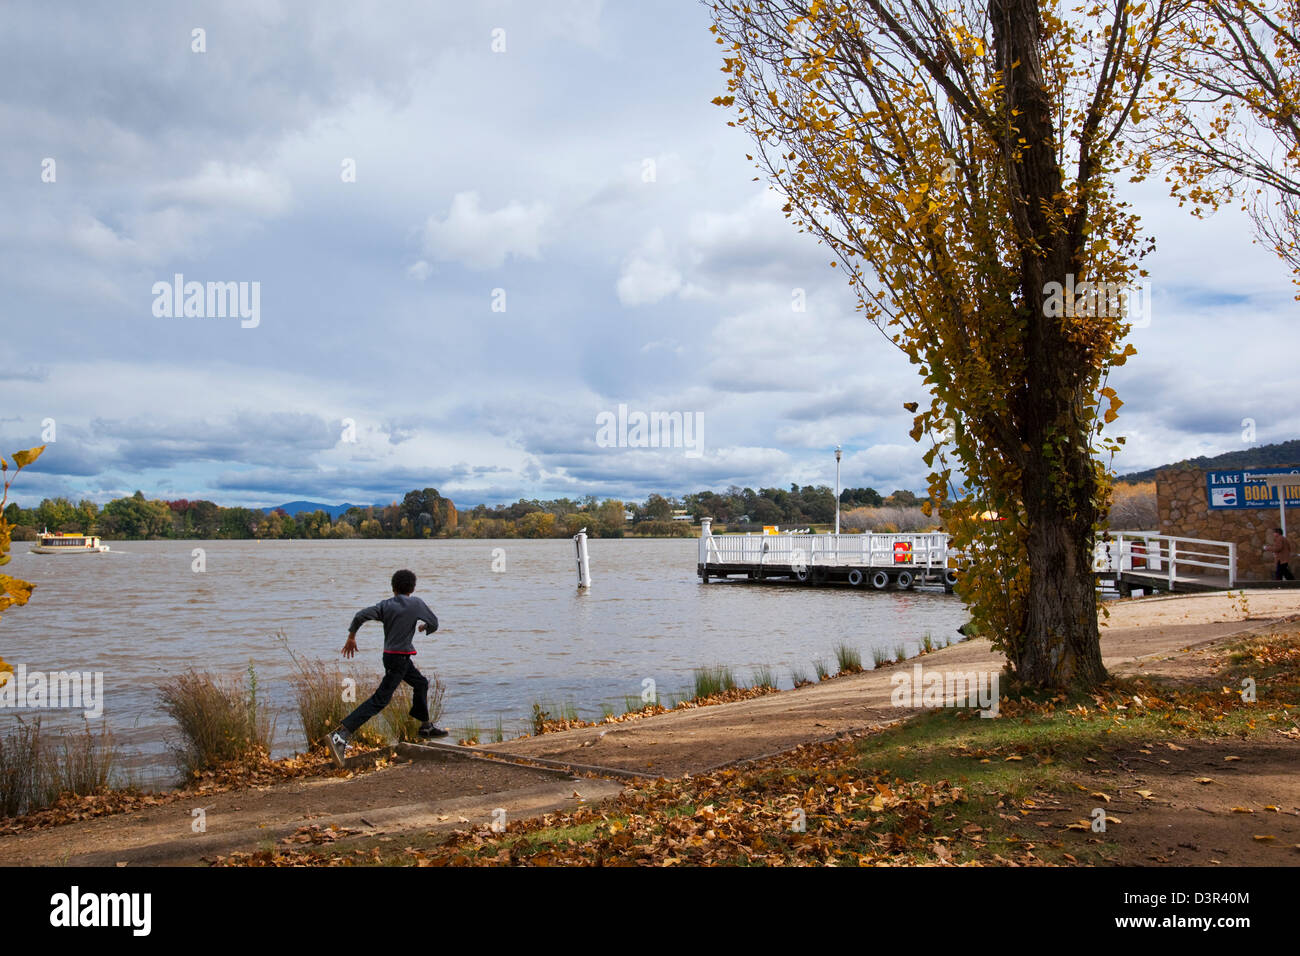 Child running along waterfront of Lake Burley Griffin. Canberra, Australian Capital Territory (ACT), Australia Stock Photo